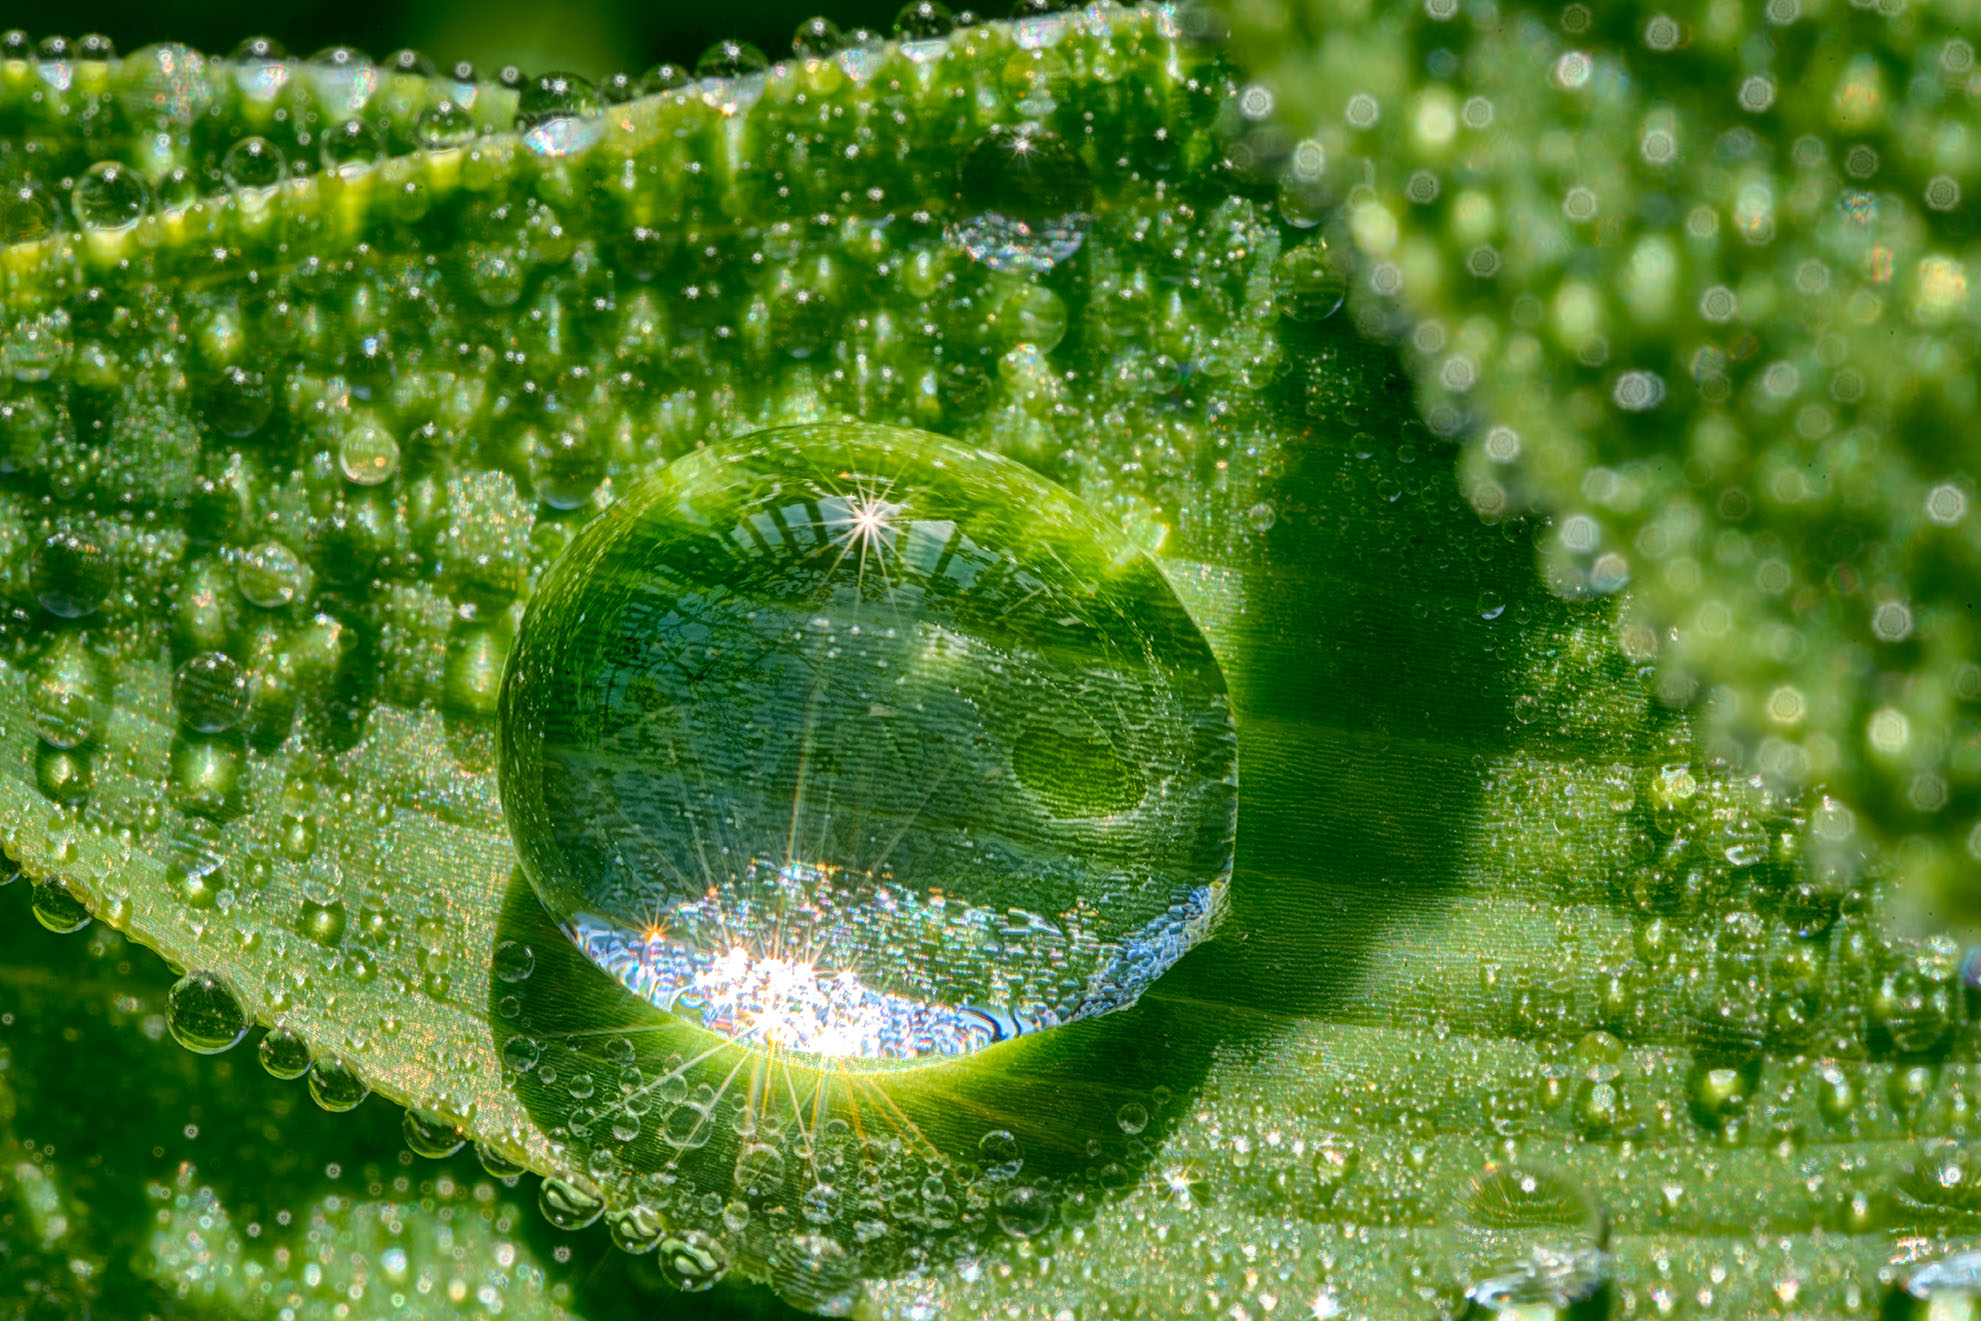 I. Introduction to Macro Water Droplet Photography